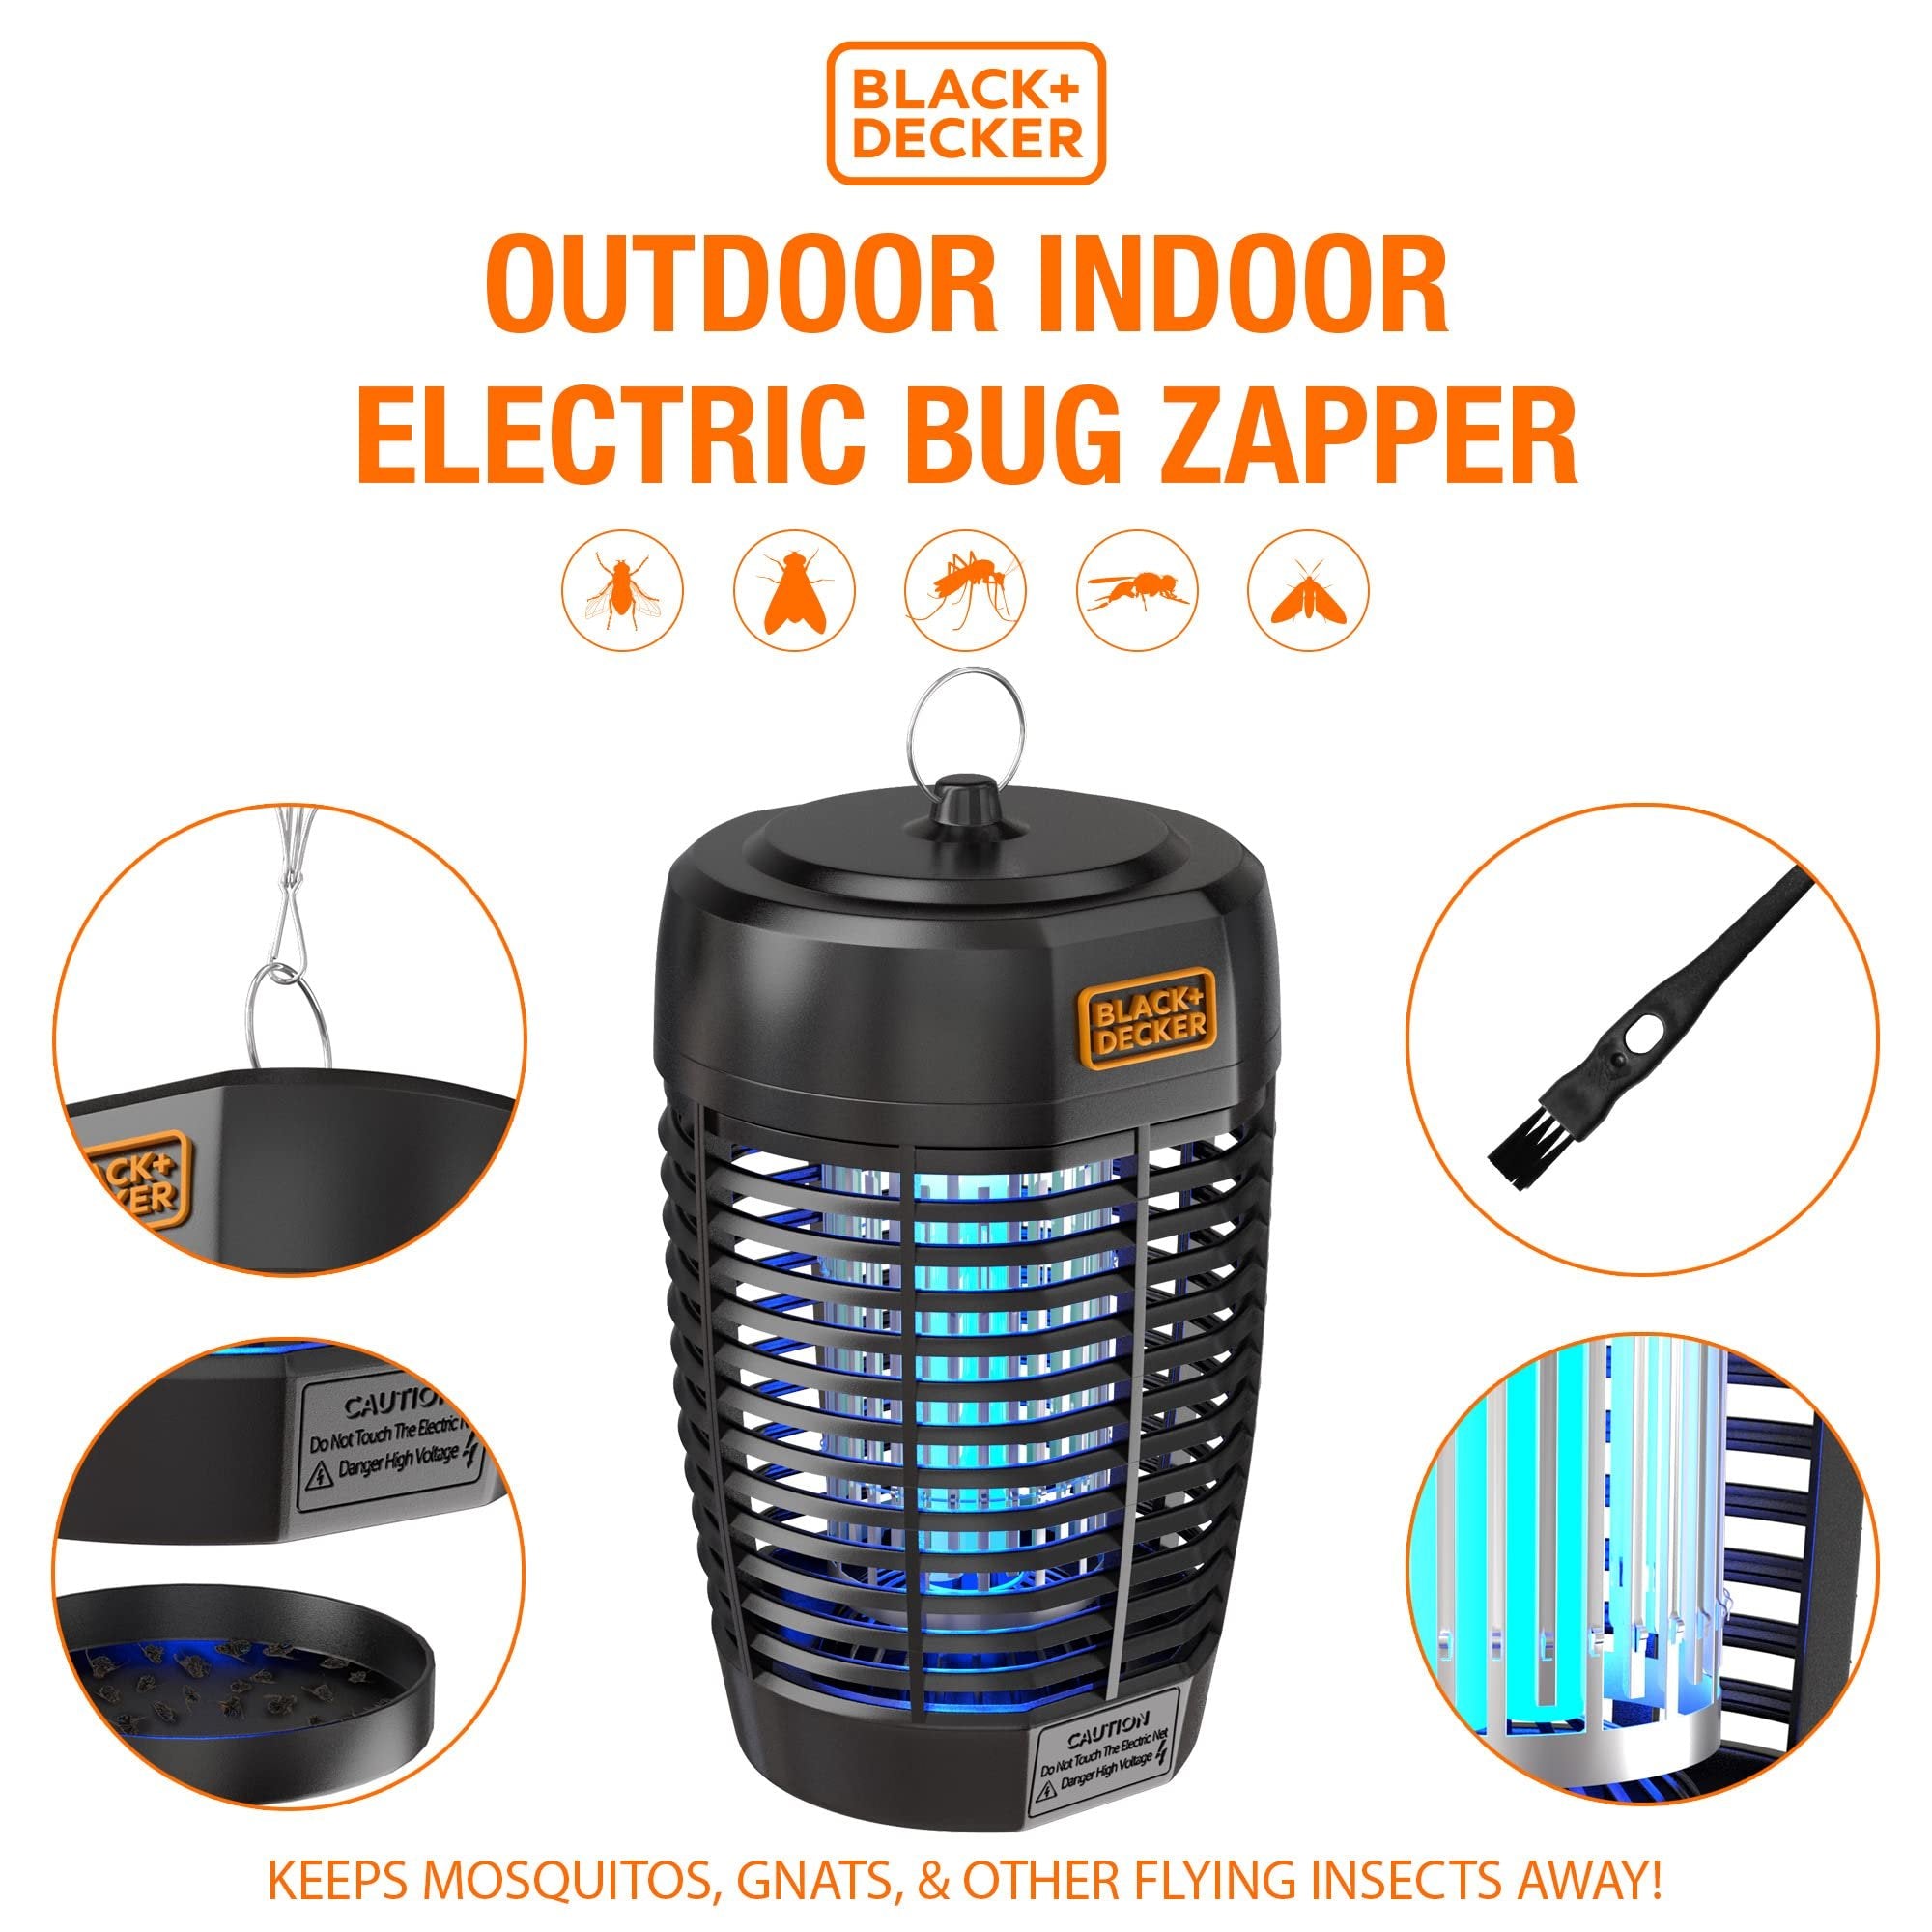 BLACK+DECKER Bug Zapper - Mosquito Repellent Outdoor/Indoor - Black - Size options - Fly Traps - Gnat & Moth Traps - Home, Deck, Patio - Free Shipping